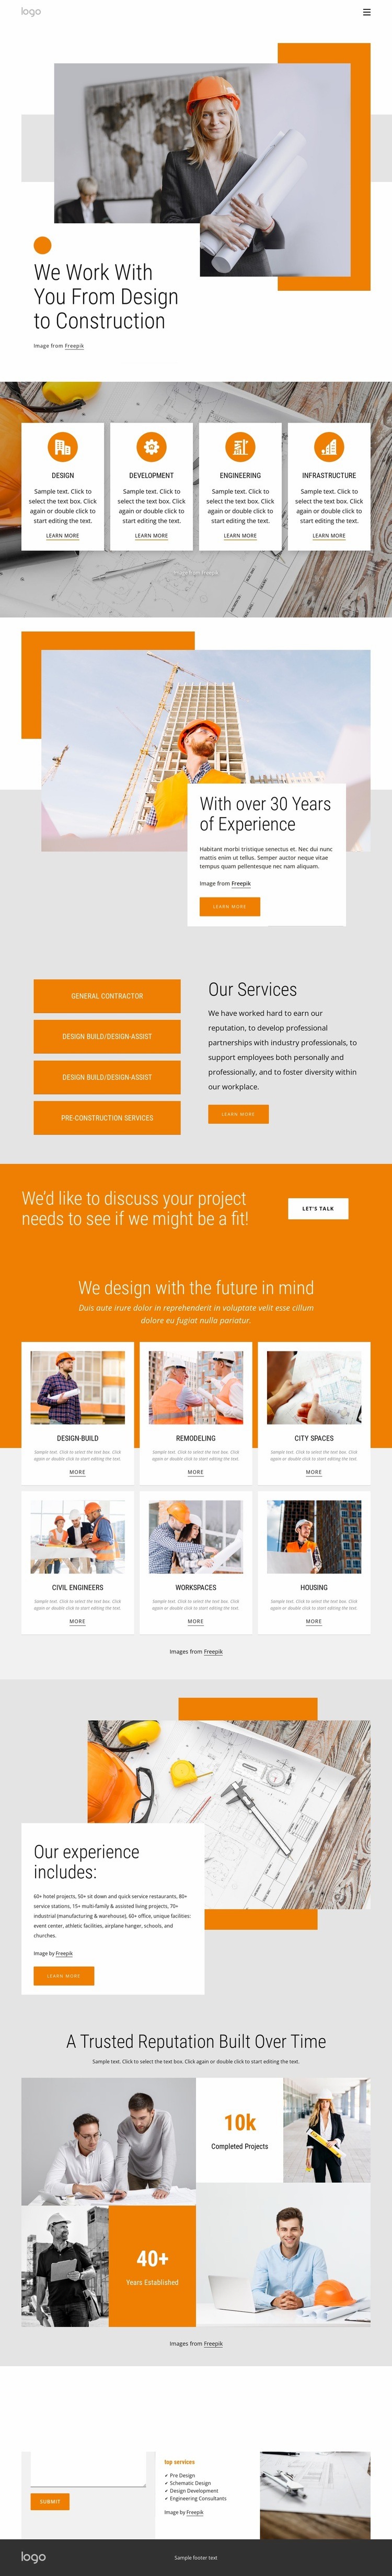 From design to construction Webflow Template Alternative